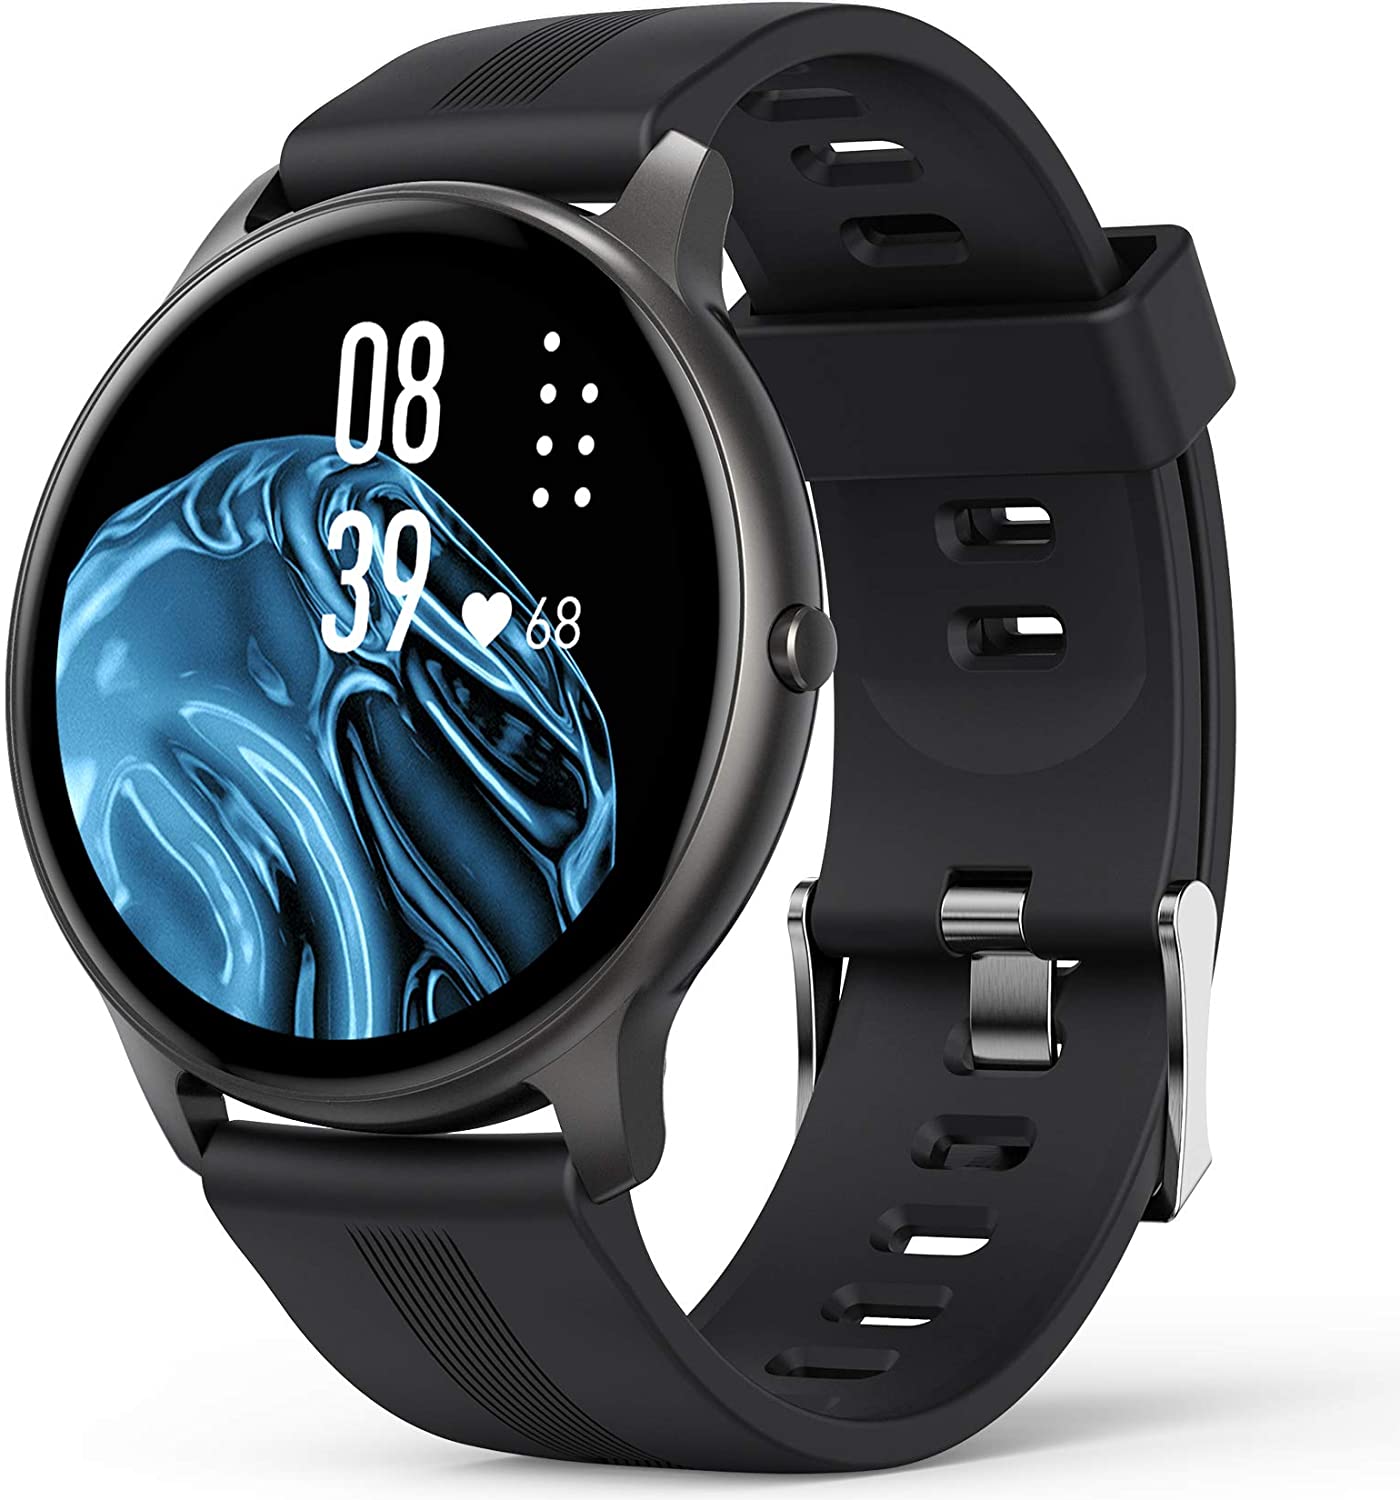 Smartwatch Uomo Orologio Fitness 1.3" Full Touch